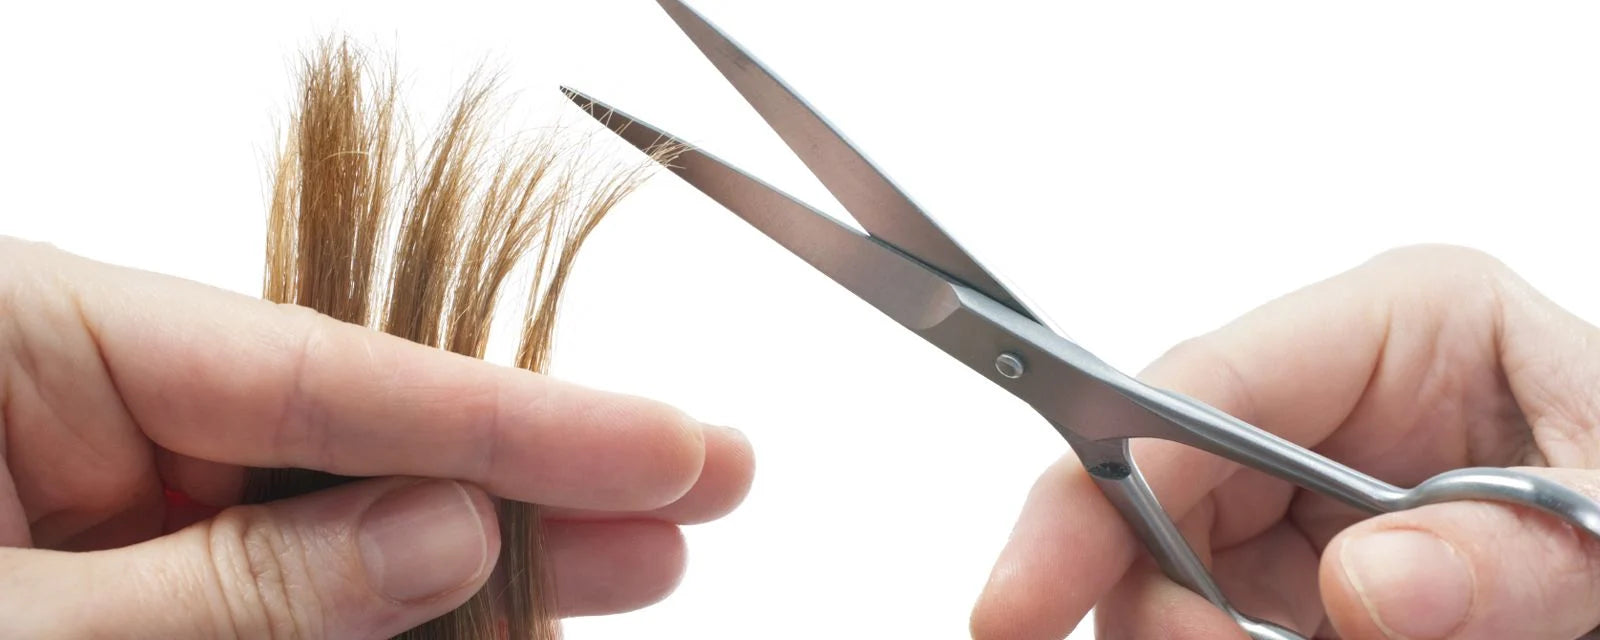 scissors cutting the tip of hair